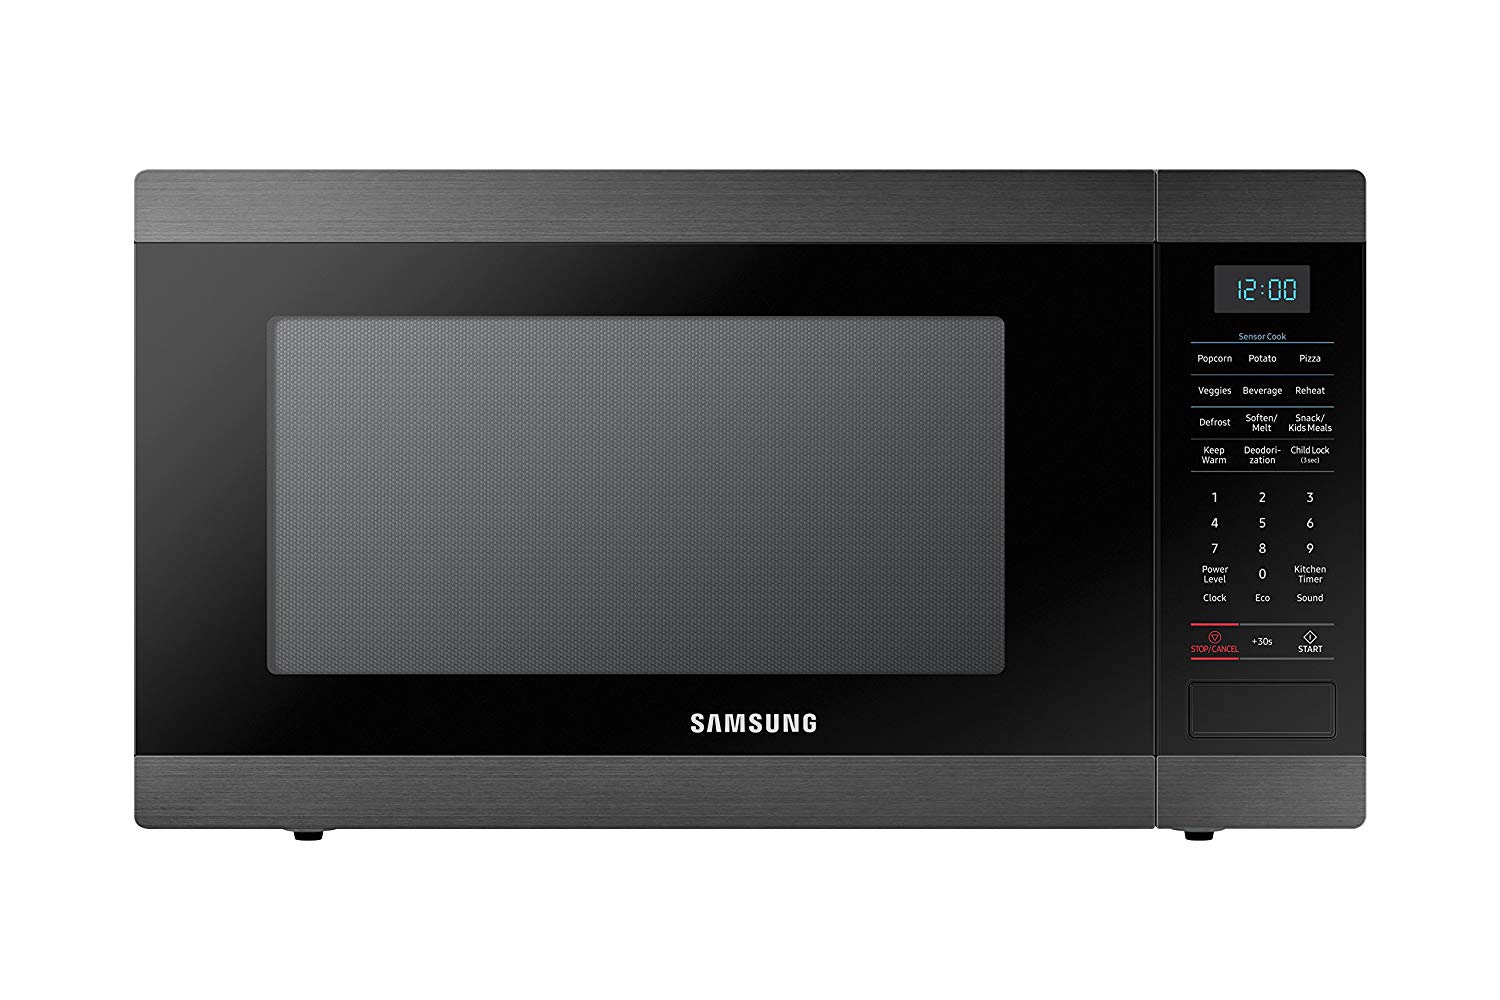 Samsung MS19M8000AG/AA Large Capacity Countertop Microwave Oven, Black Stainless Steel